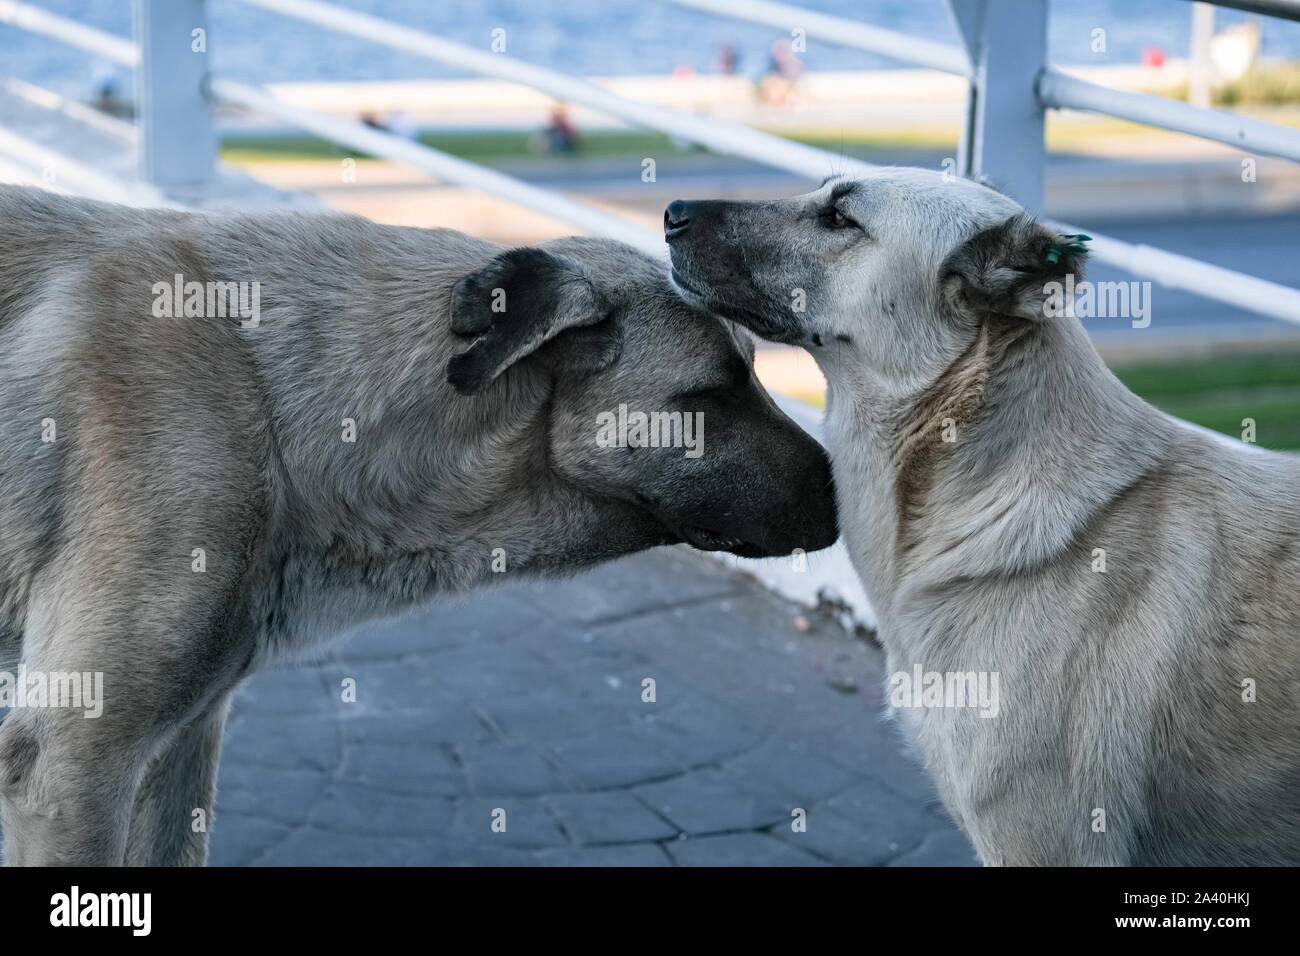 Two big old urban dogs with ear tags, getting to know and greeting each other by sniffing in the middle of the street in Izmir, Turkey. Stock Photo